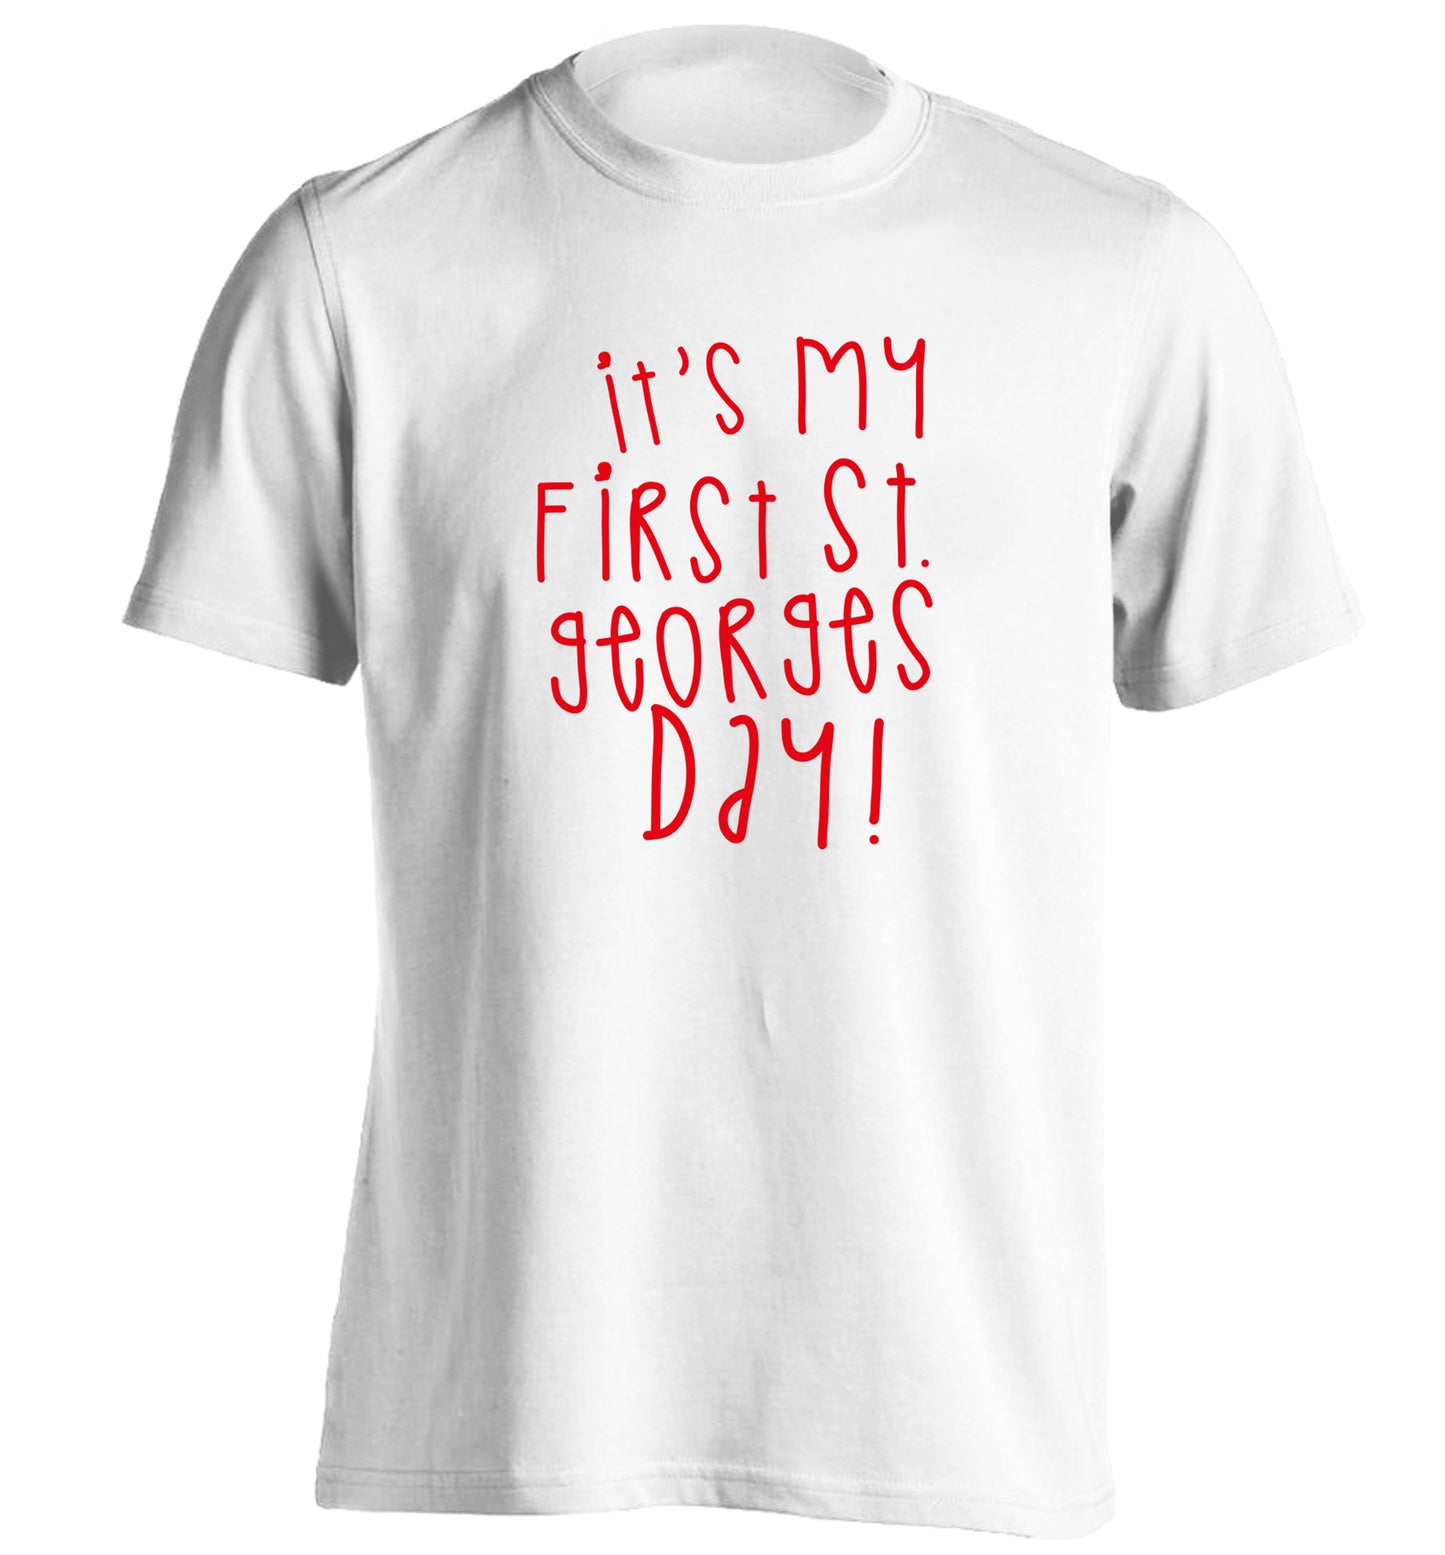 It's my first St Georges day adults unisex white Tshirt 2XL